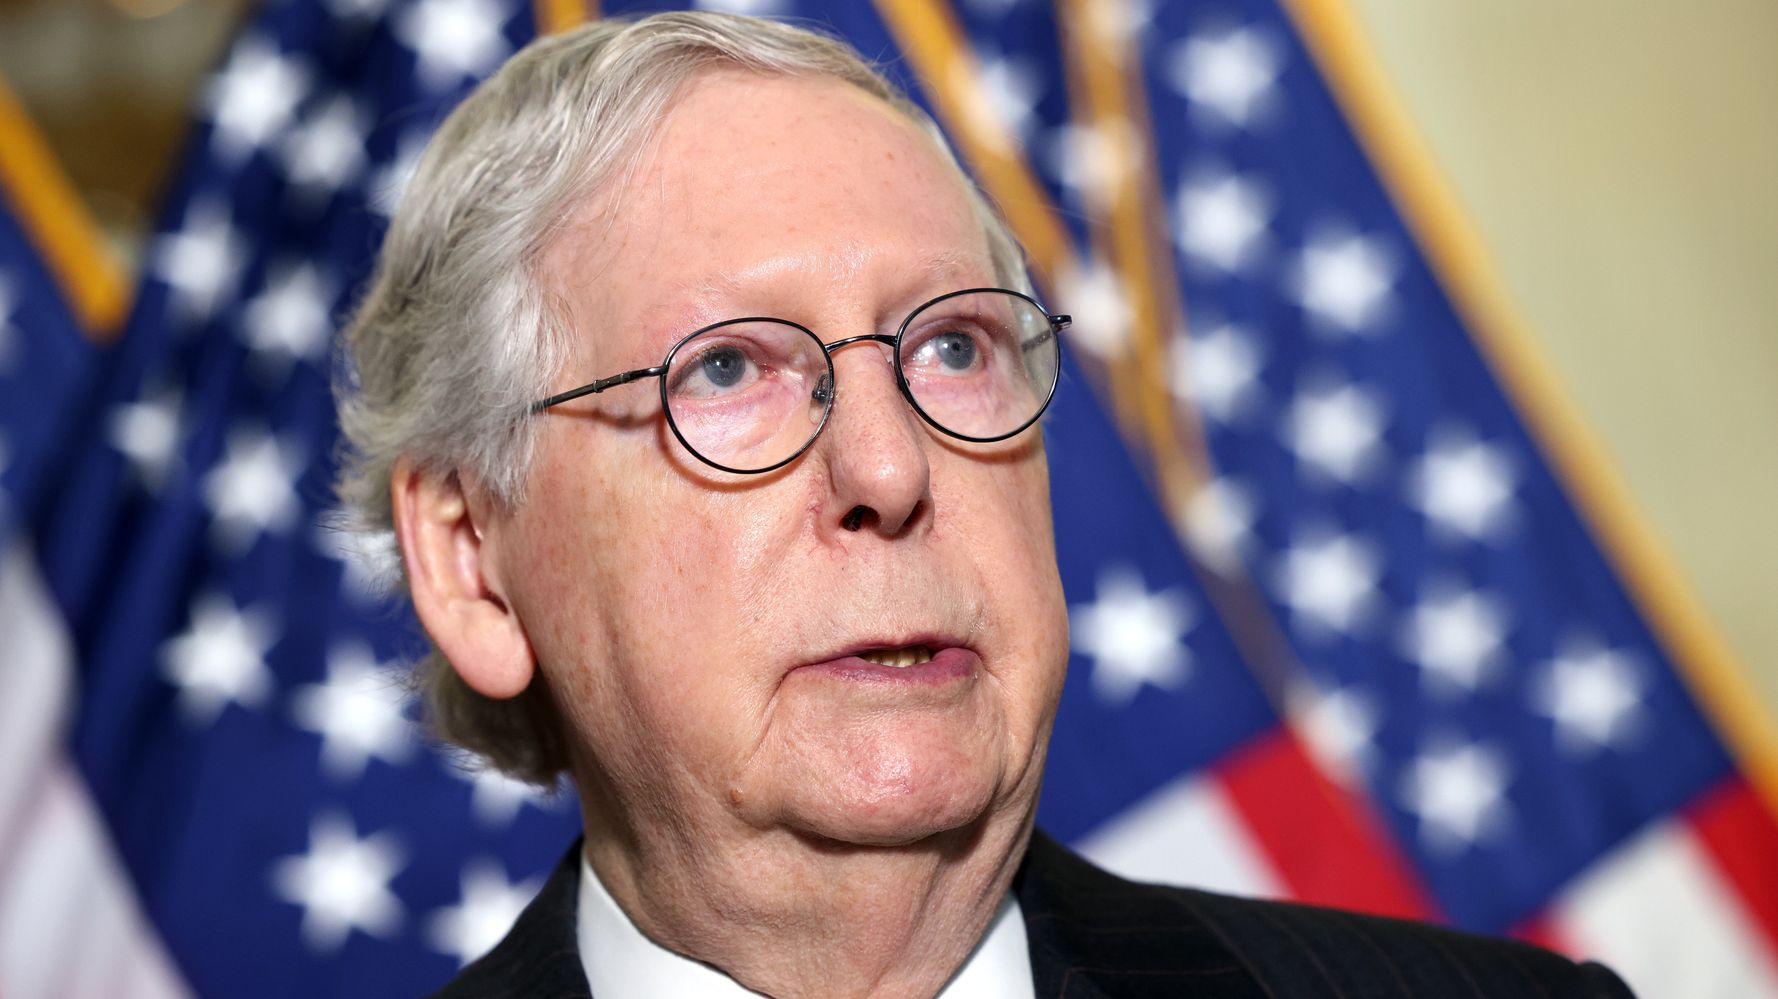 Mitch McConnell Opposes Bipartisan Commission On Jan. 6 Attack